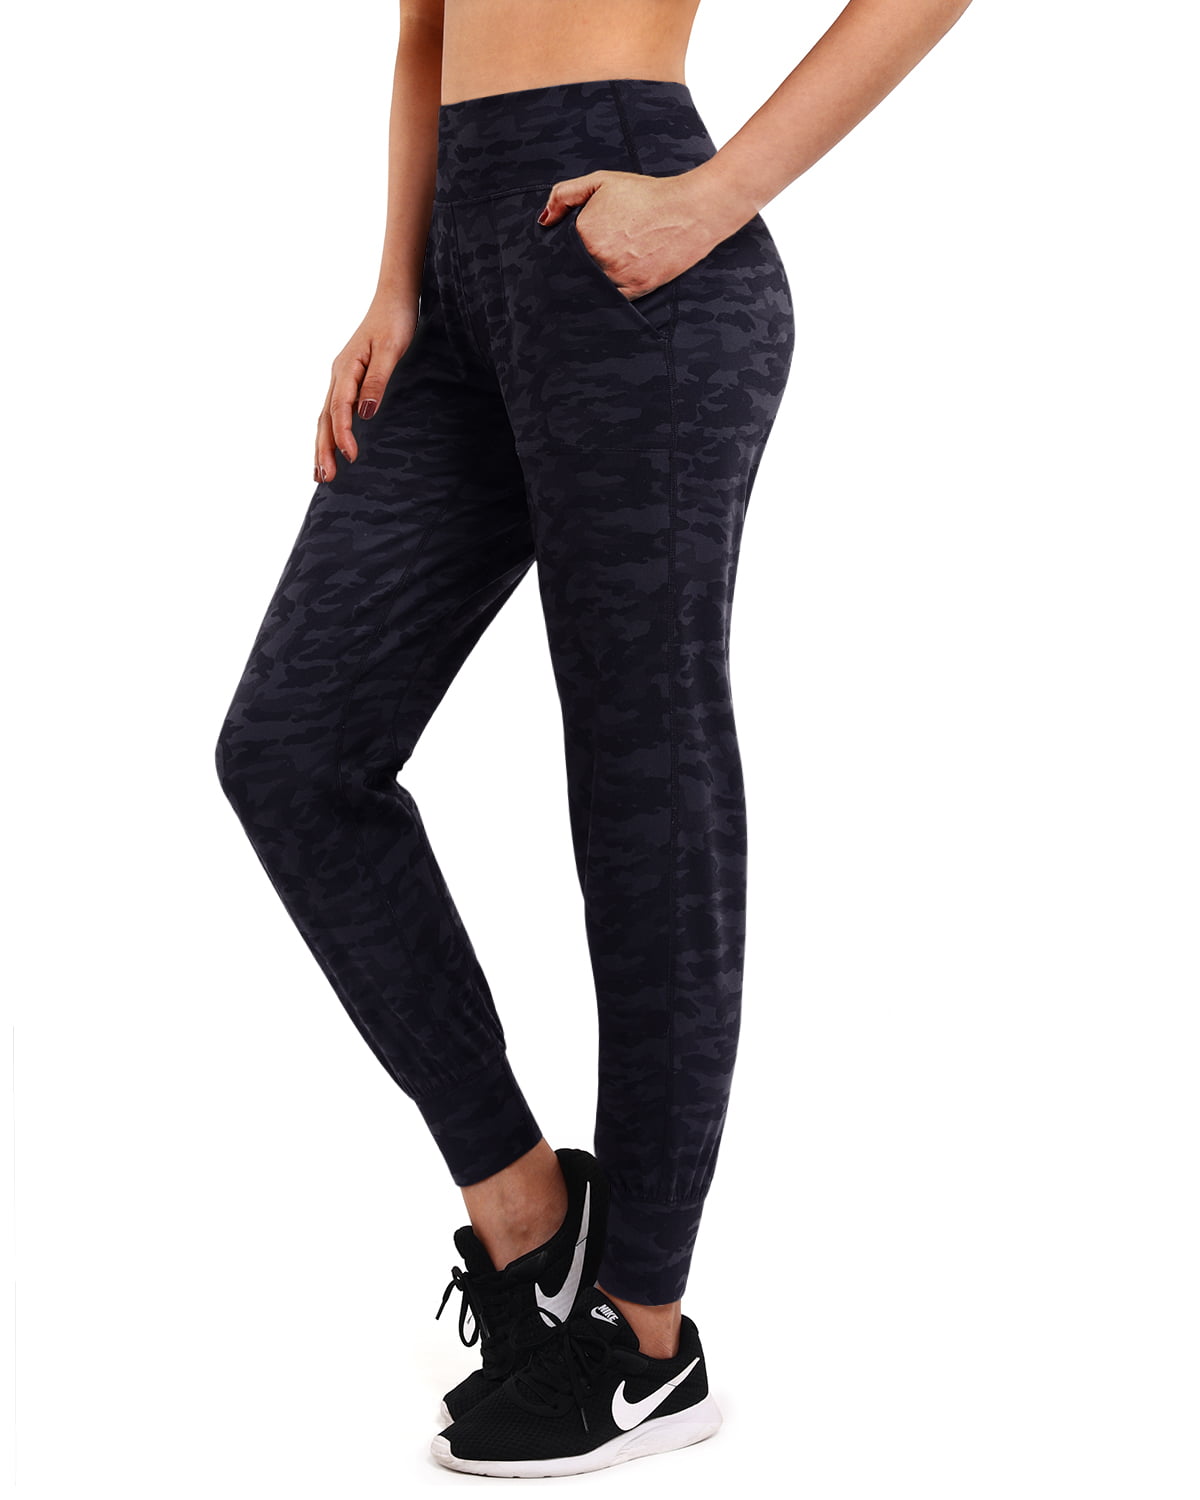 Promover Yoga Pants Women Wide Leg Sweatpants with Pockets Stretch